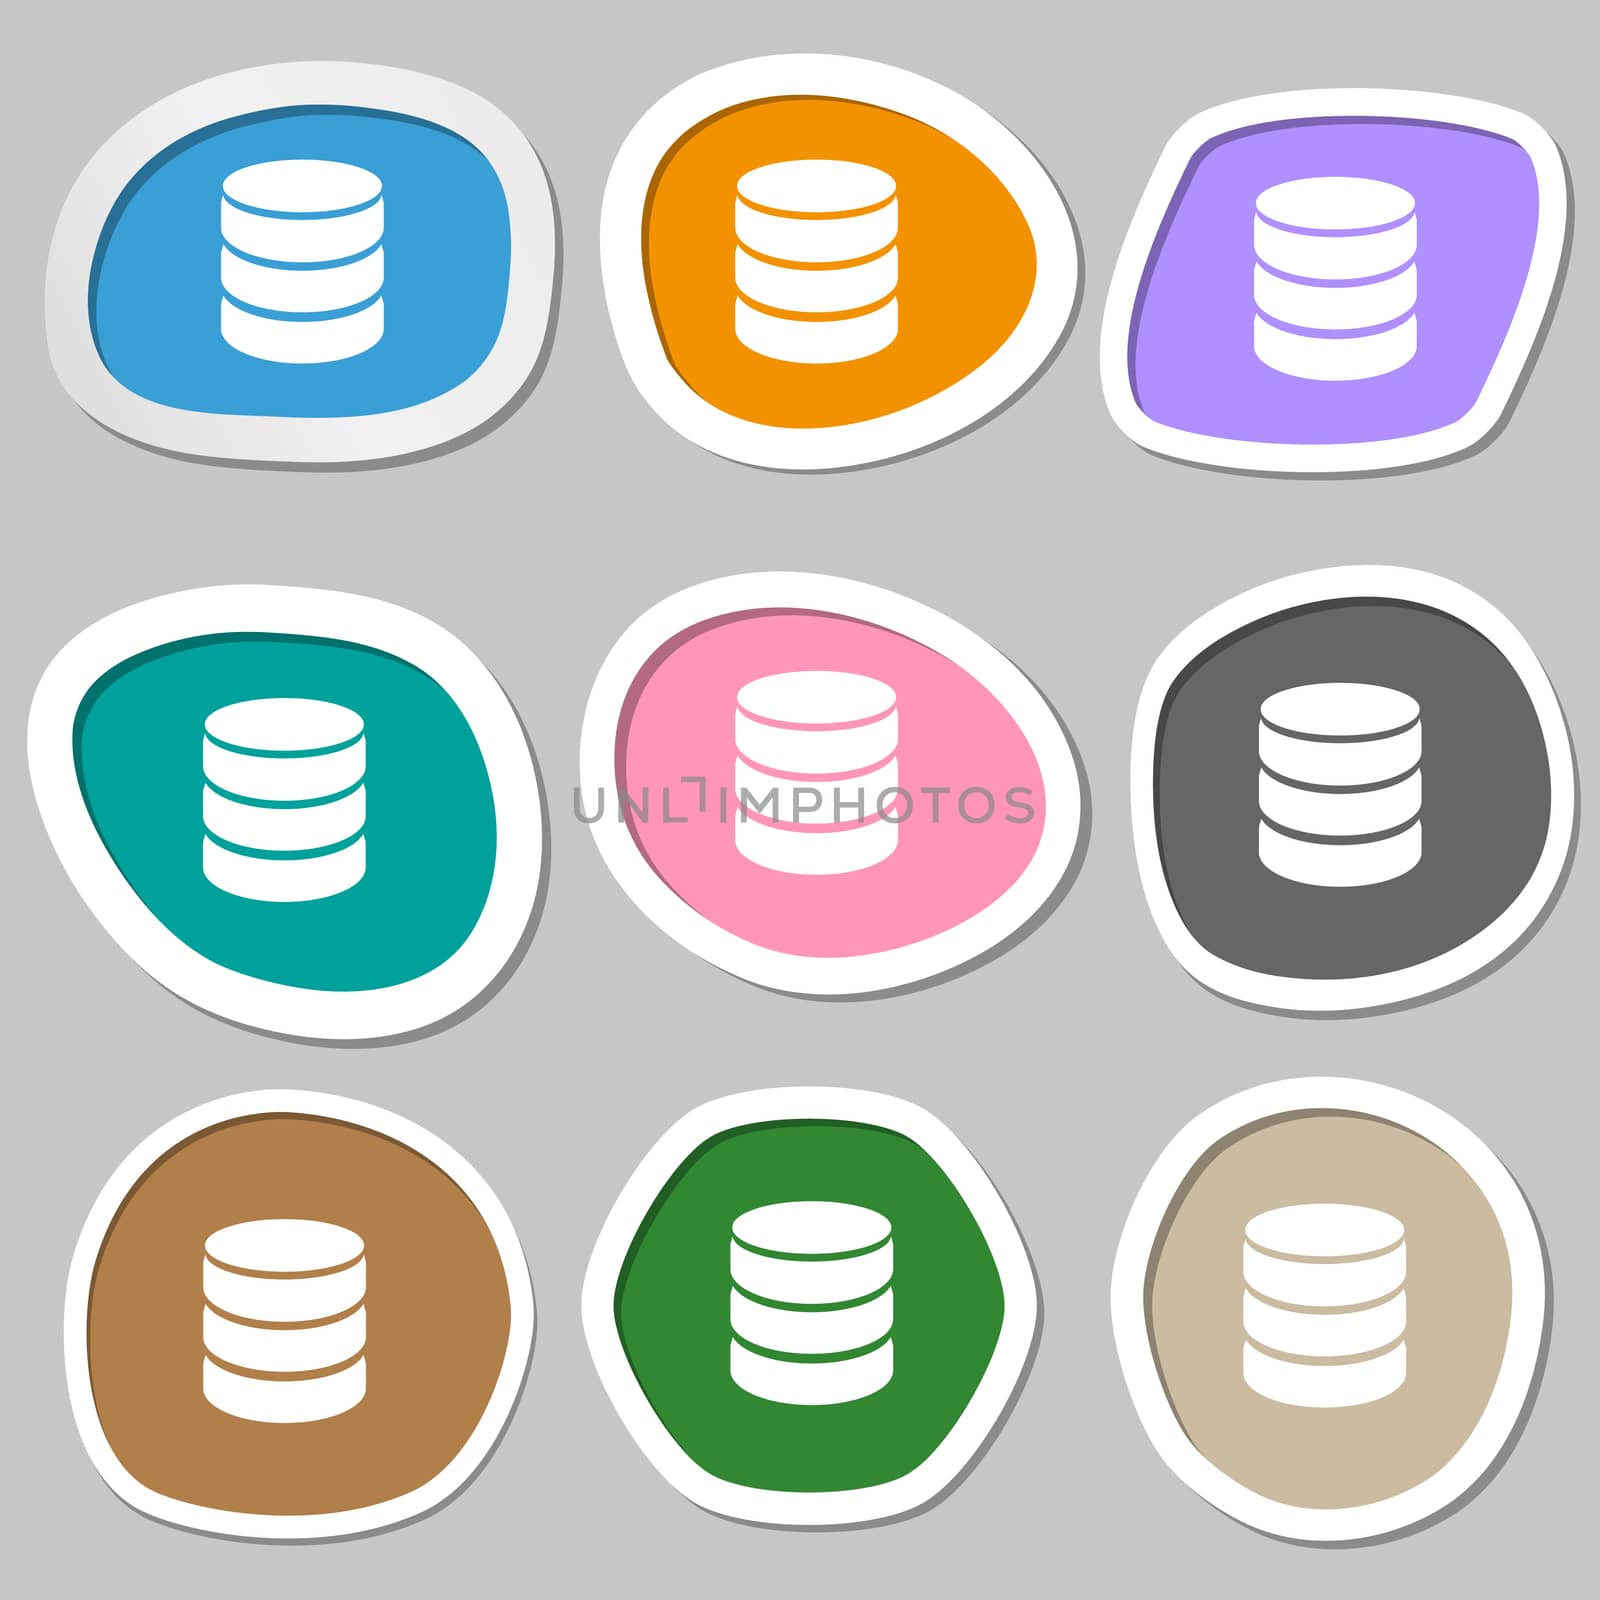 Hard disk and database sign icon. flash drive stick symbol. Multicolored paper stickers. illustration